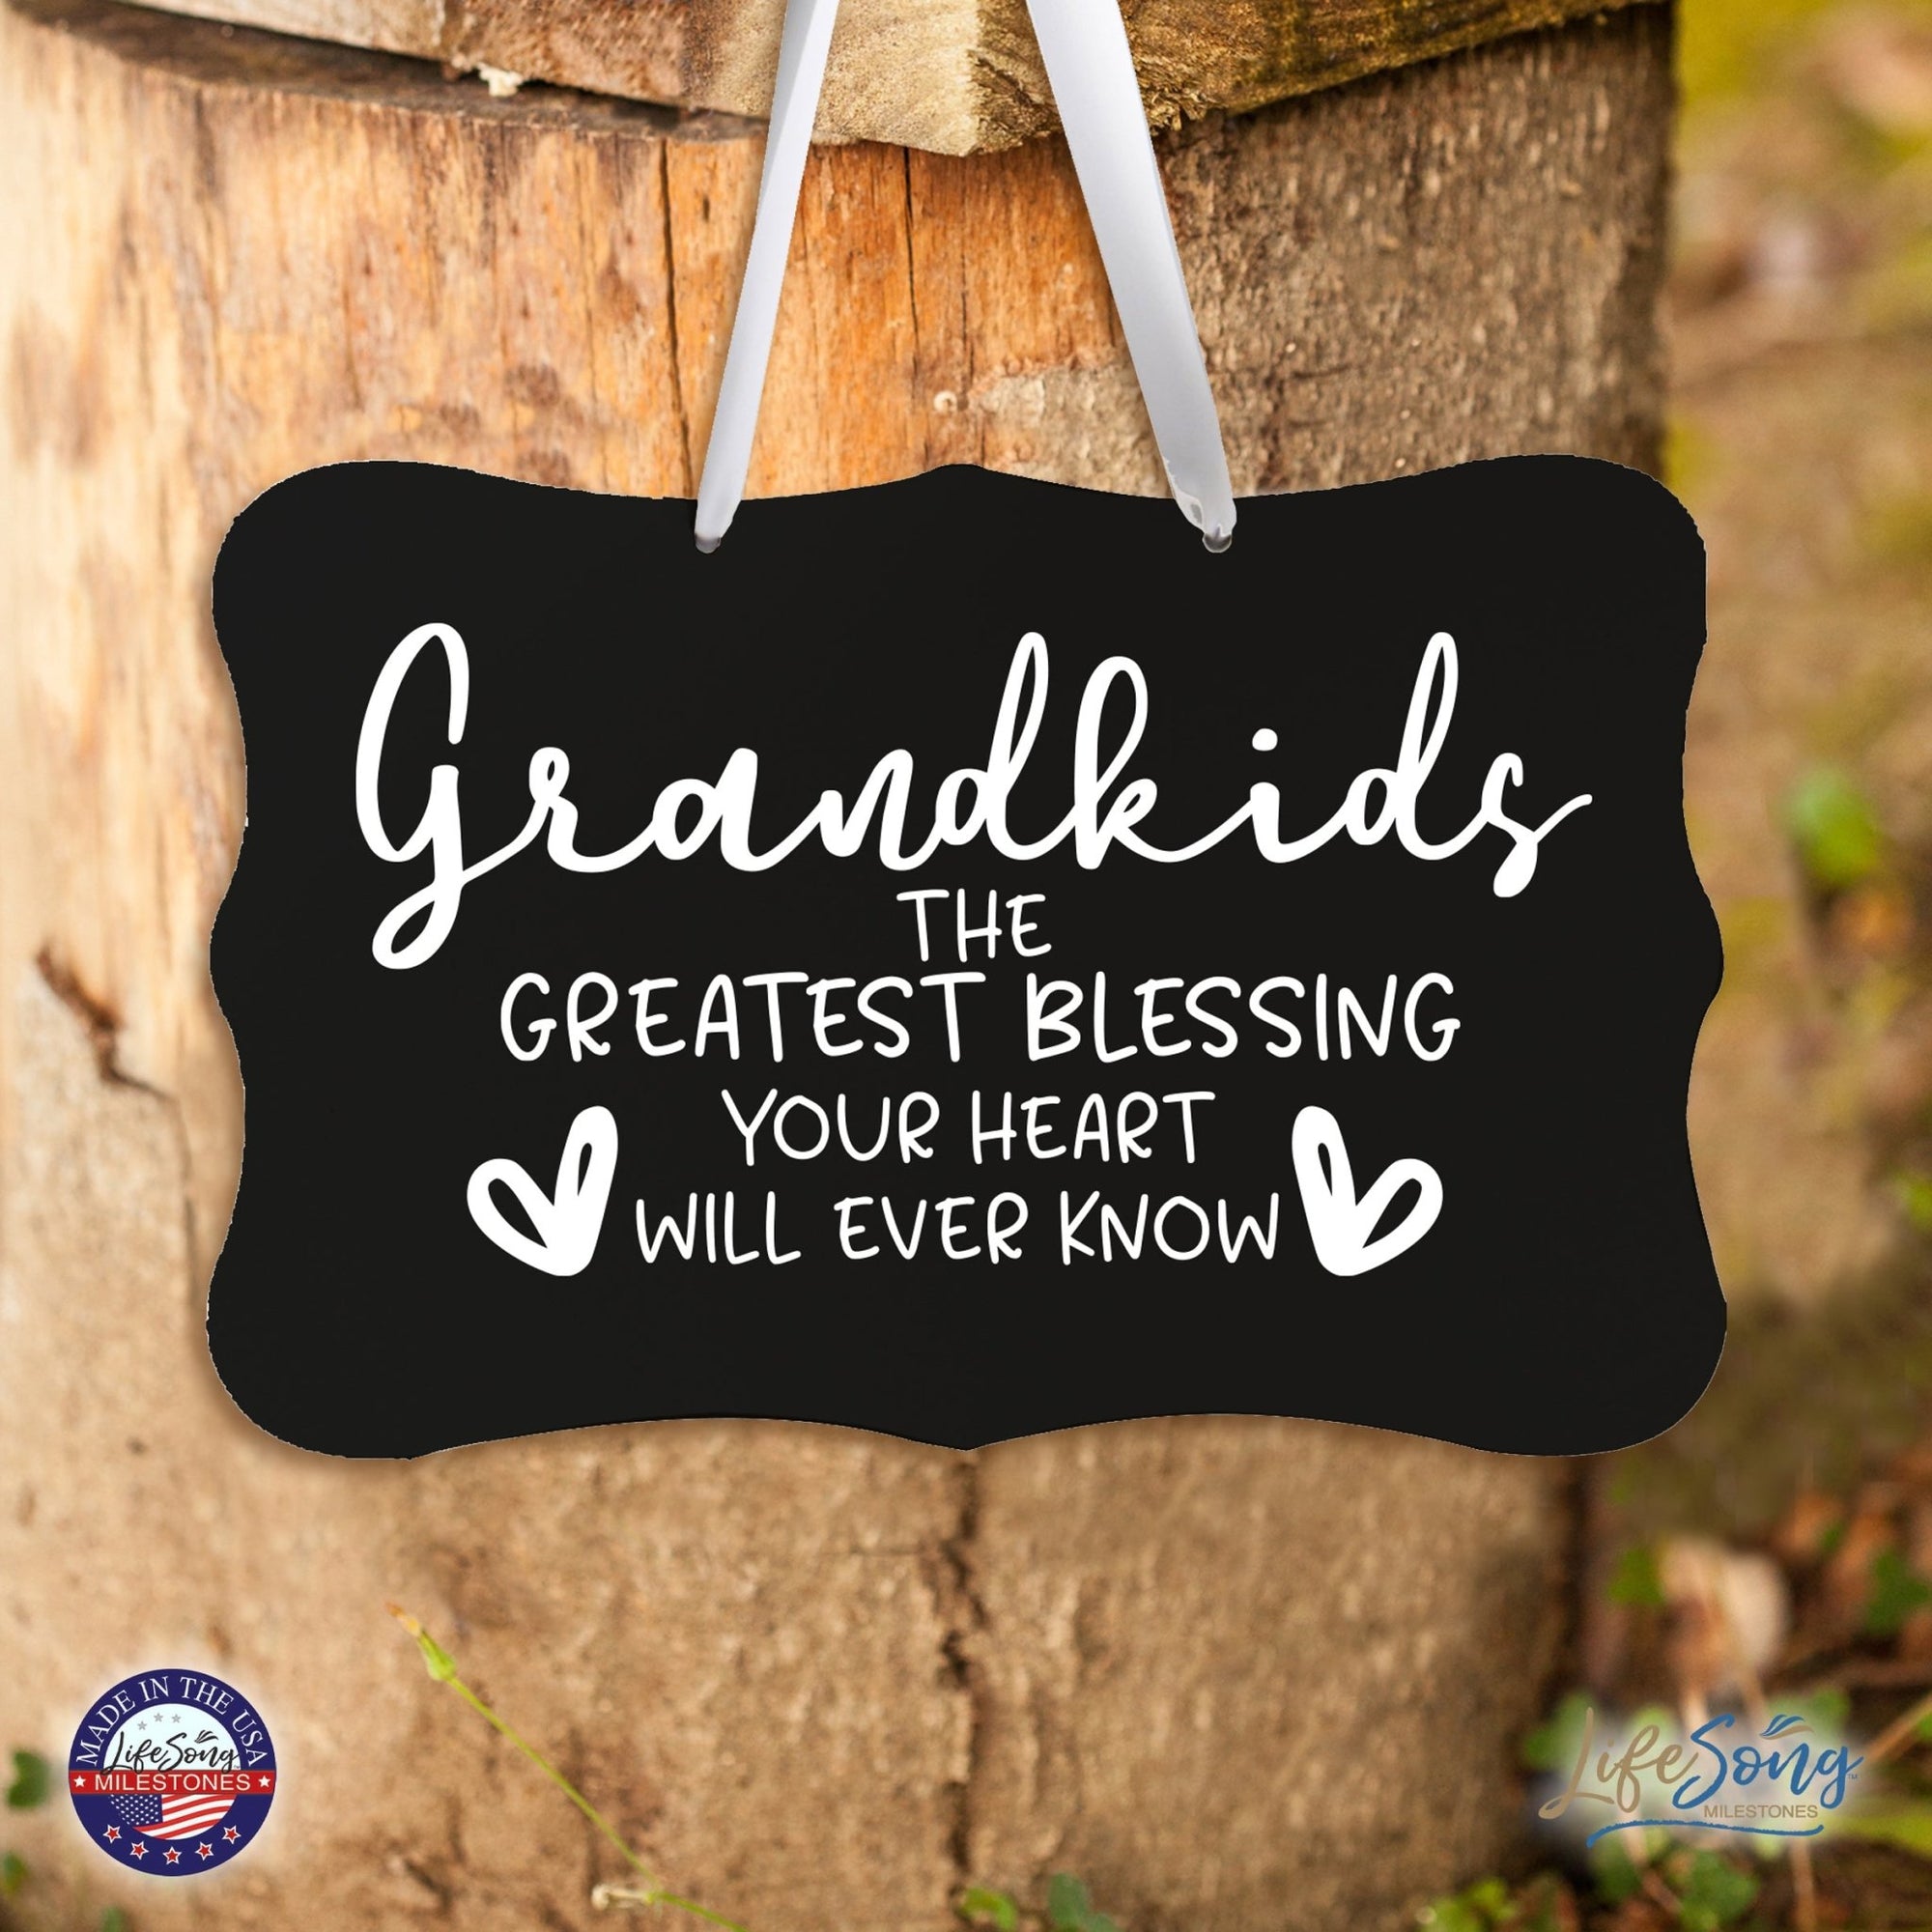 Modern Inspirational Wooden Wall Hanging Sign for Home Decorations 8x12 - The Greatest Blessing - LifeSong Milestones